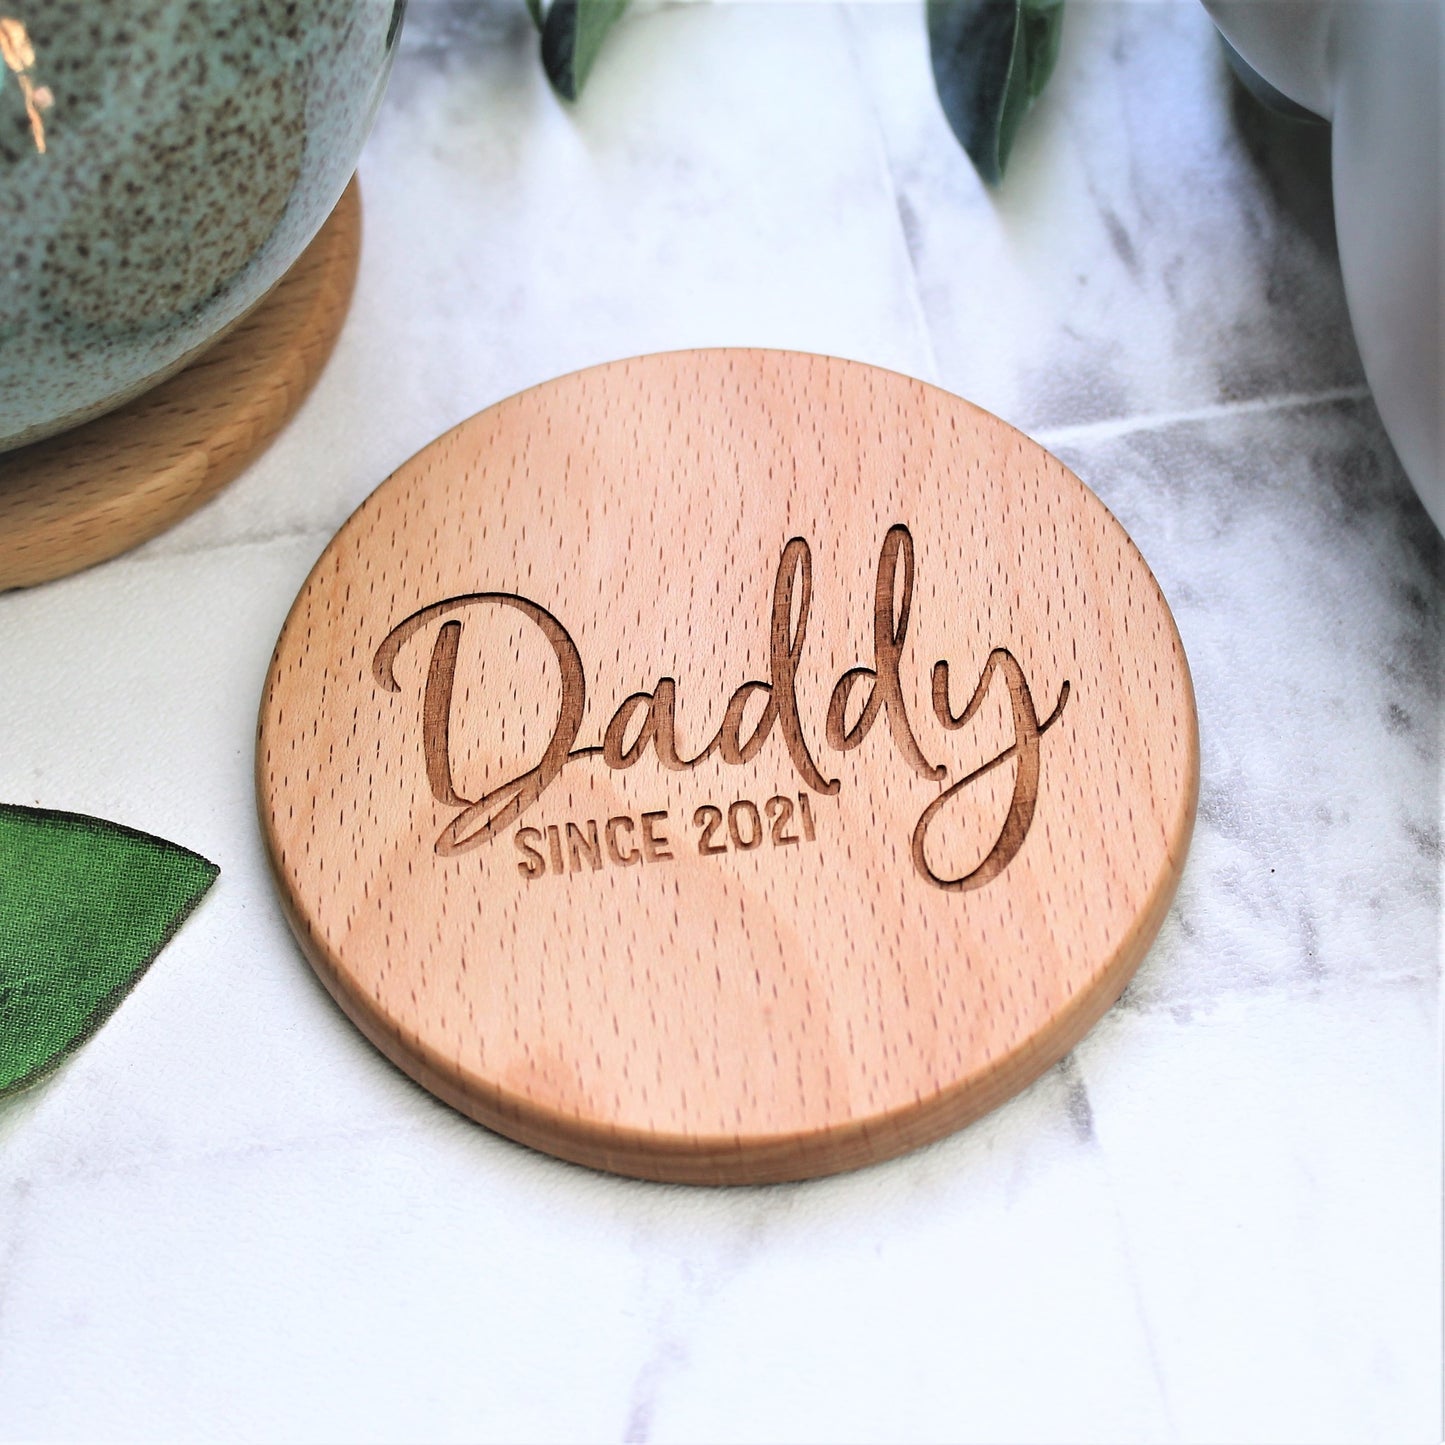 personalised daddy coaster, engraved on a round wooden disk. Perfect for fathers day